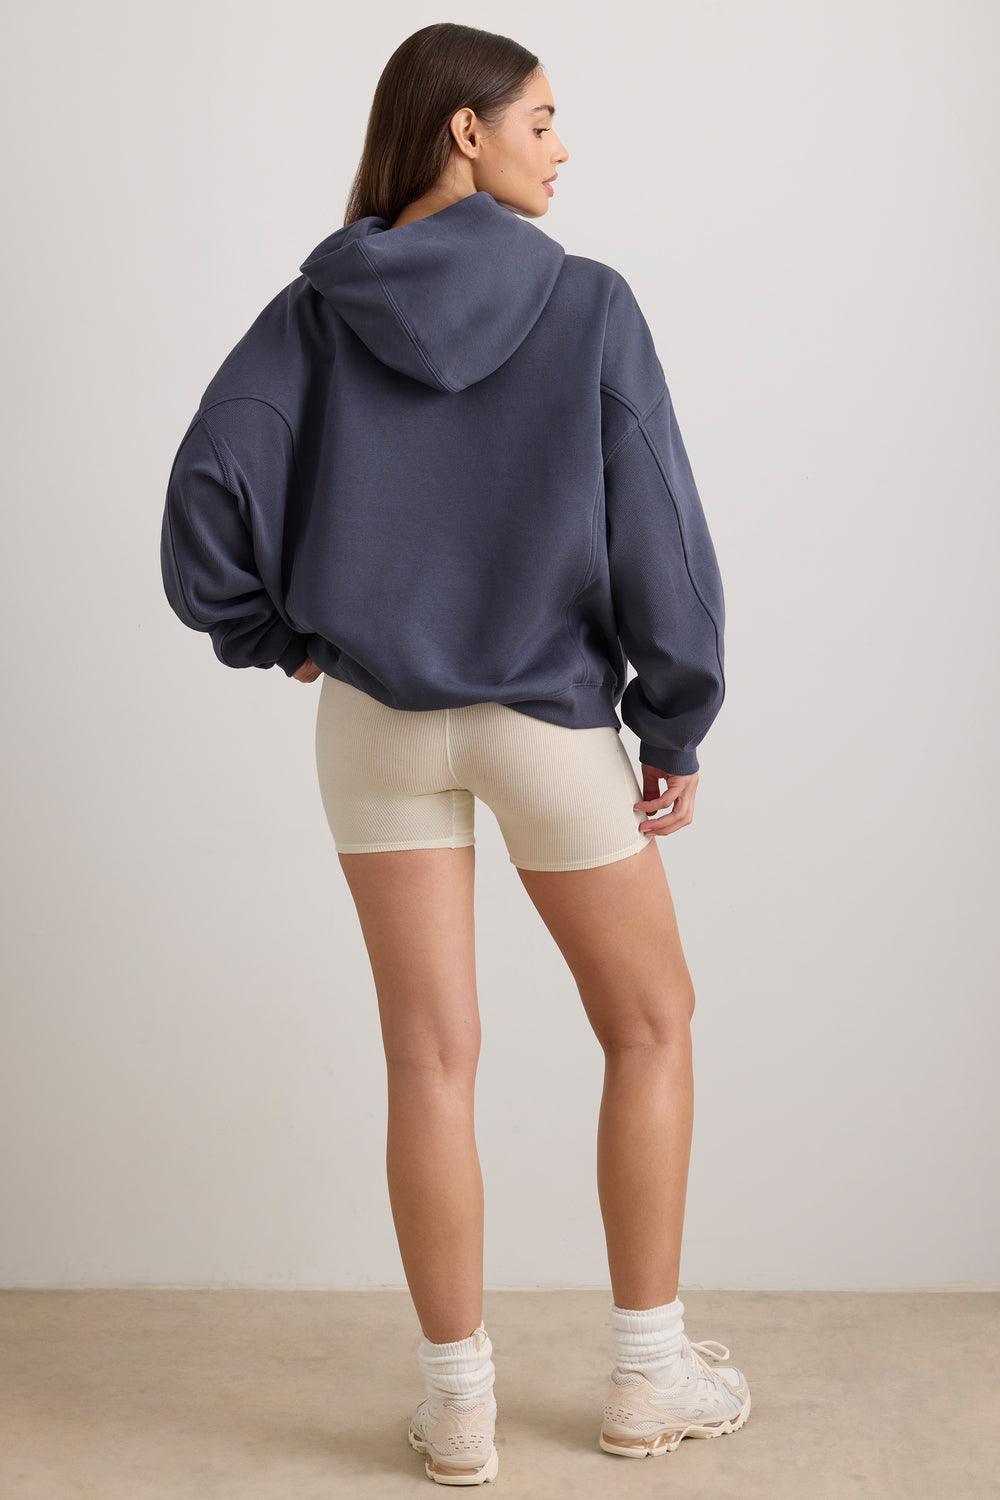 The Pilates Collection Hoodie - French Vanilla